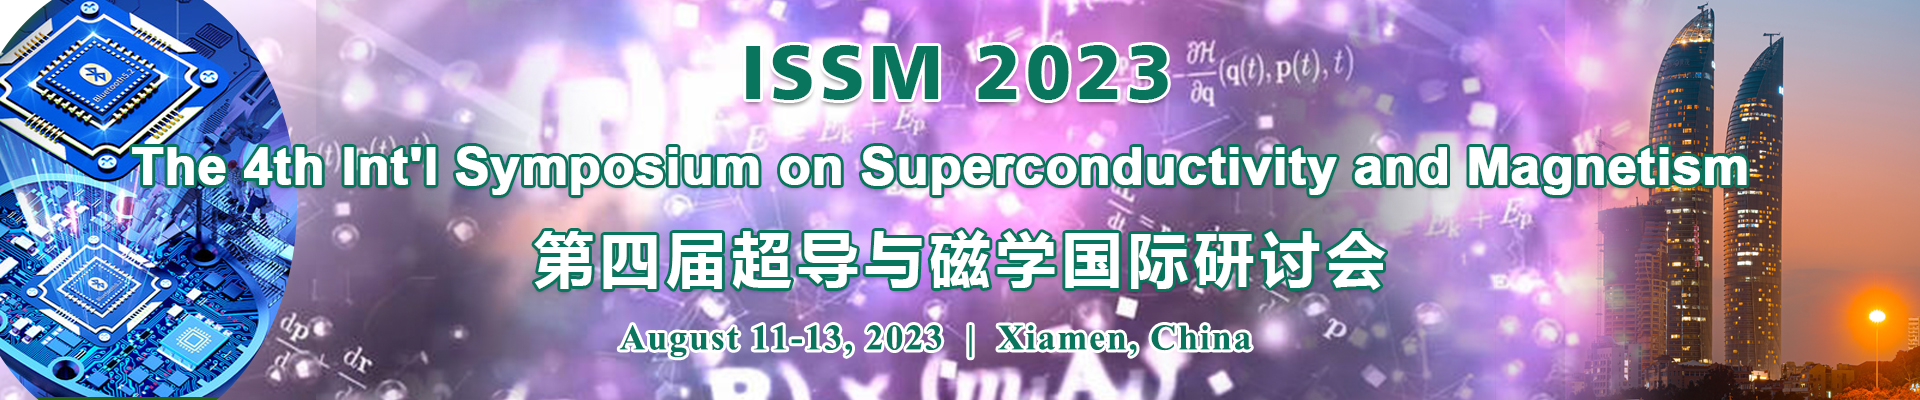 The 4th Int'l Symposium on Superconductivity and Magnetism (ISSM 2023), Xiamen, Fujian, China